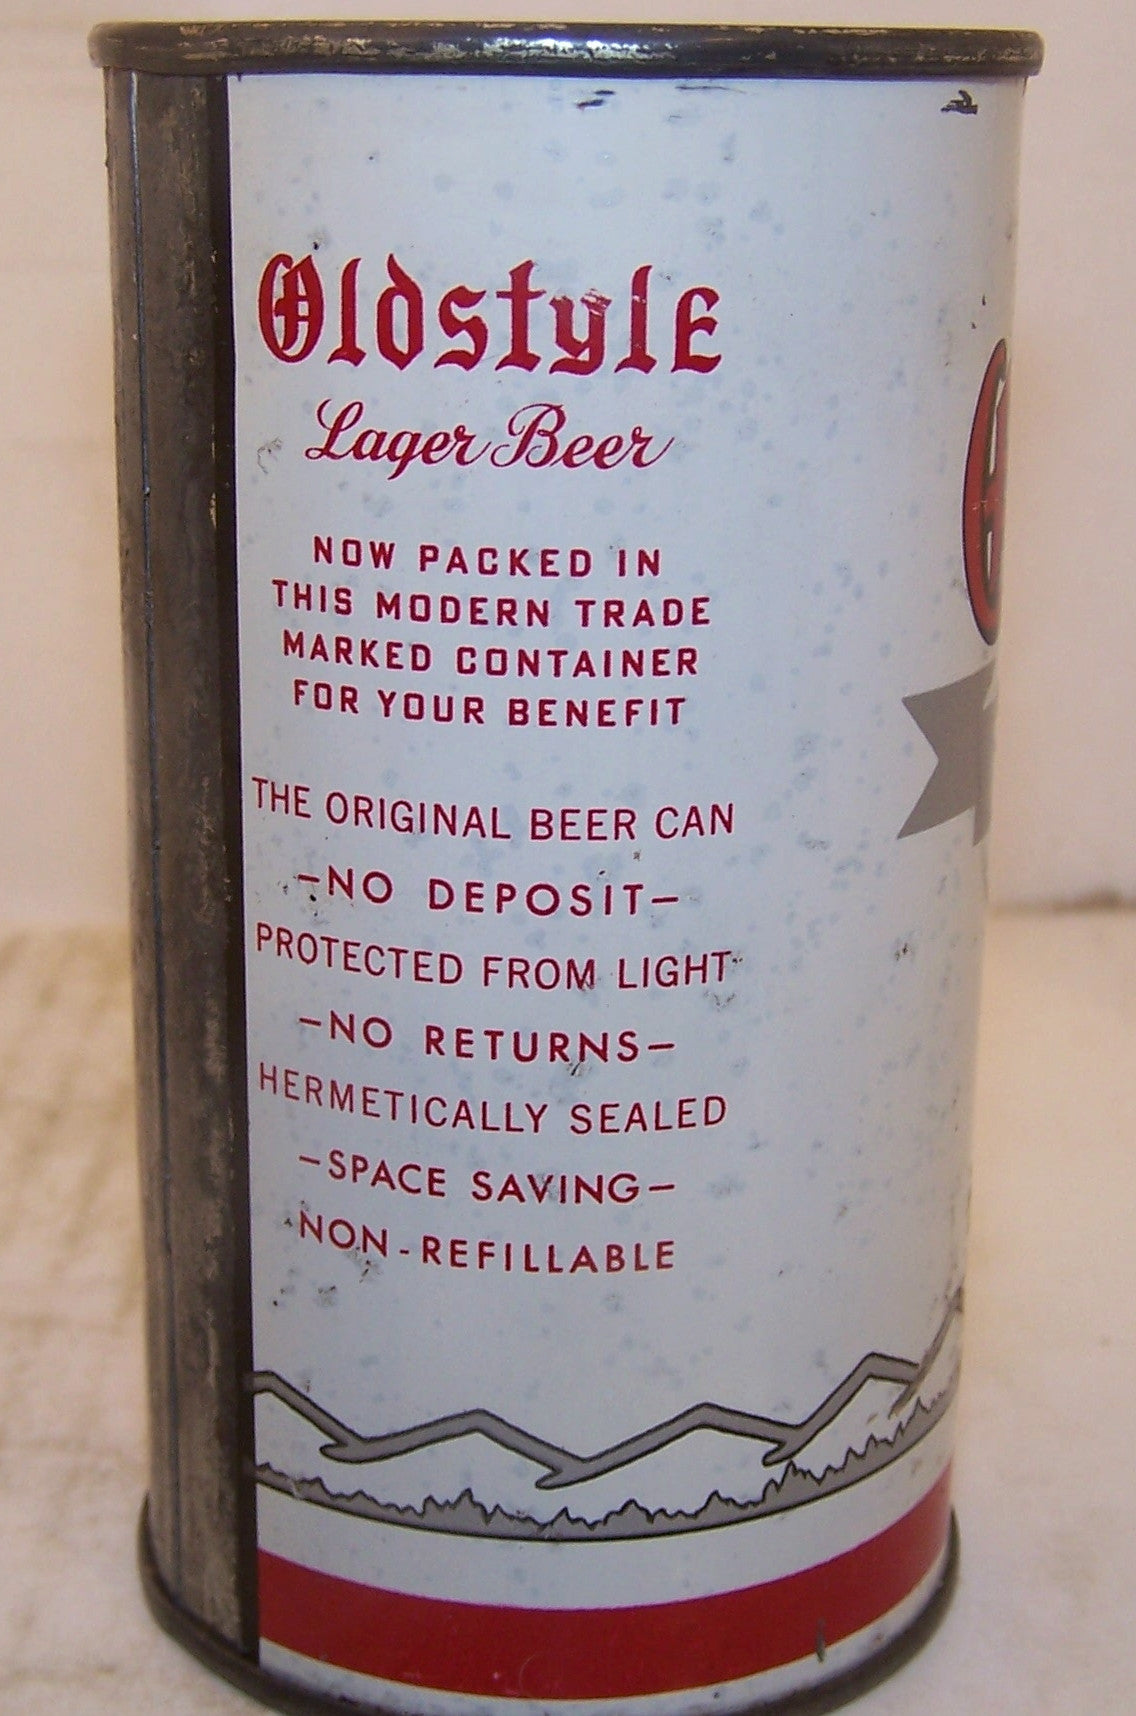 Old Style Pale Export Lager Beer, Lilek page #621 Grade 1-/2+ Sold on 2/22/15